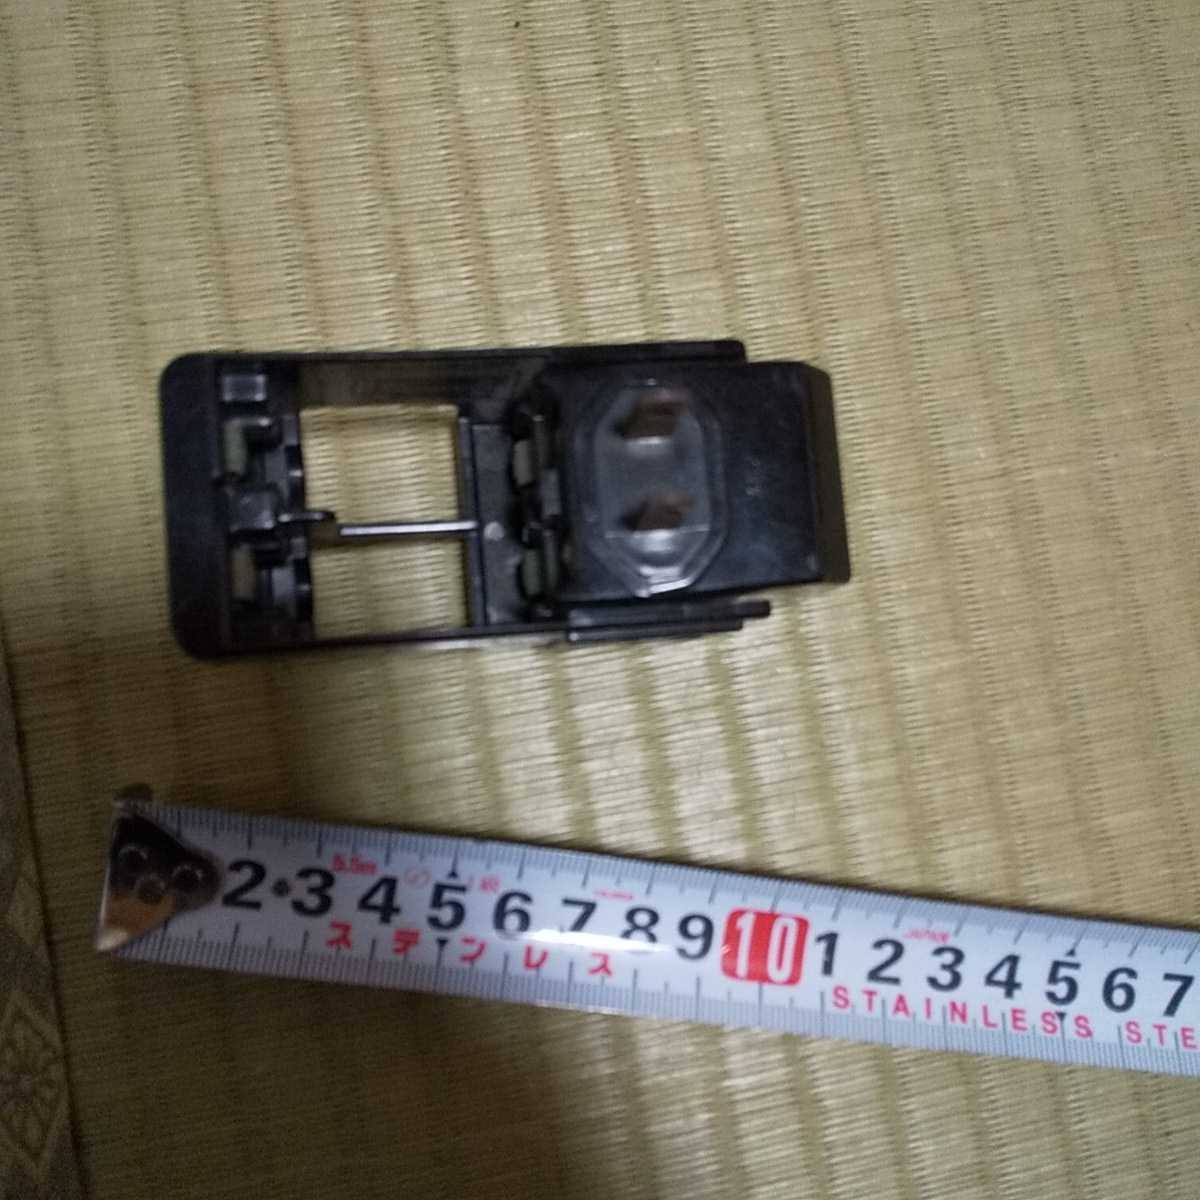 cadnica sanyo charger nc-310 コンセント 充電器？ n300 dc2.4v 送料520_画像2